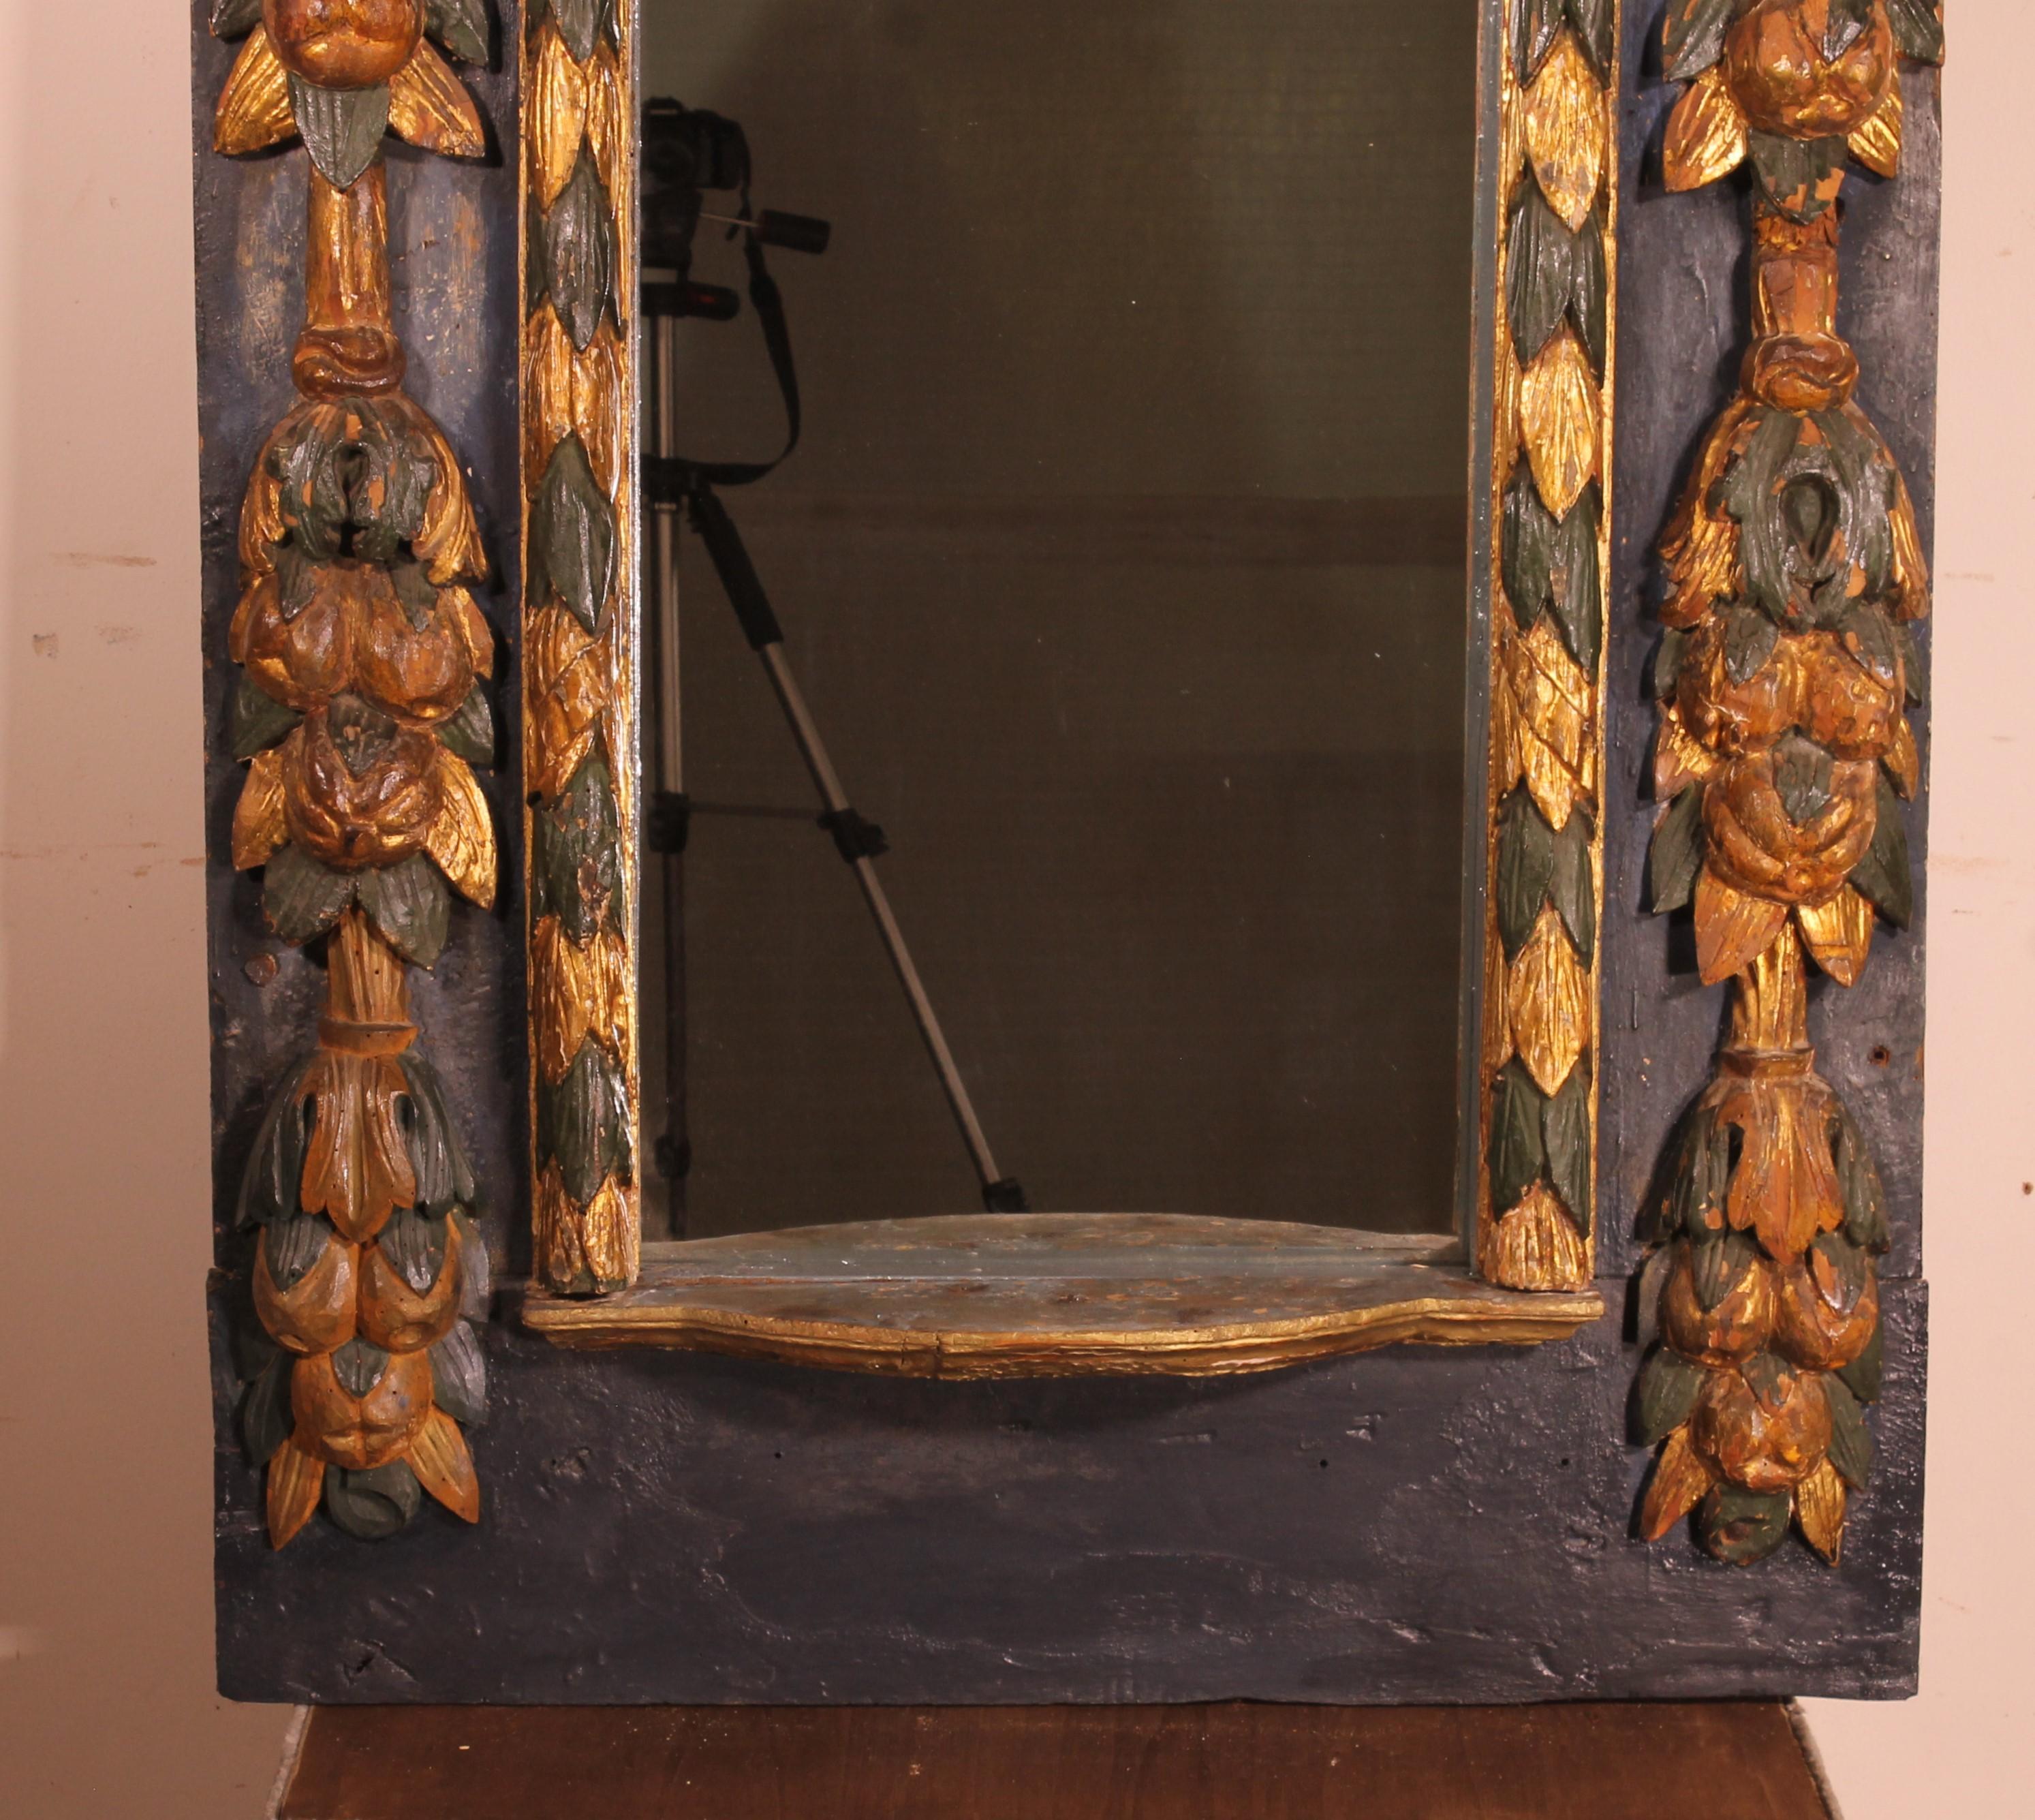 Superb and rare 17th century Spanish mirror in polychrome wood
This is a niche that has been transformed into a mirror

Very beautiful carved wood decorated with a marquee in the upper part. The uprights are also decorated with heads of cherubs,